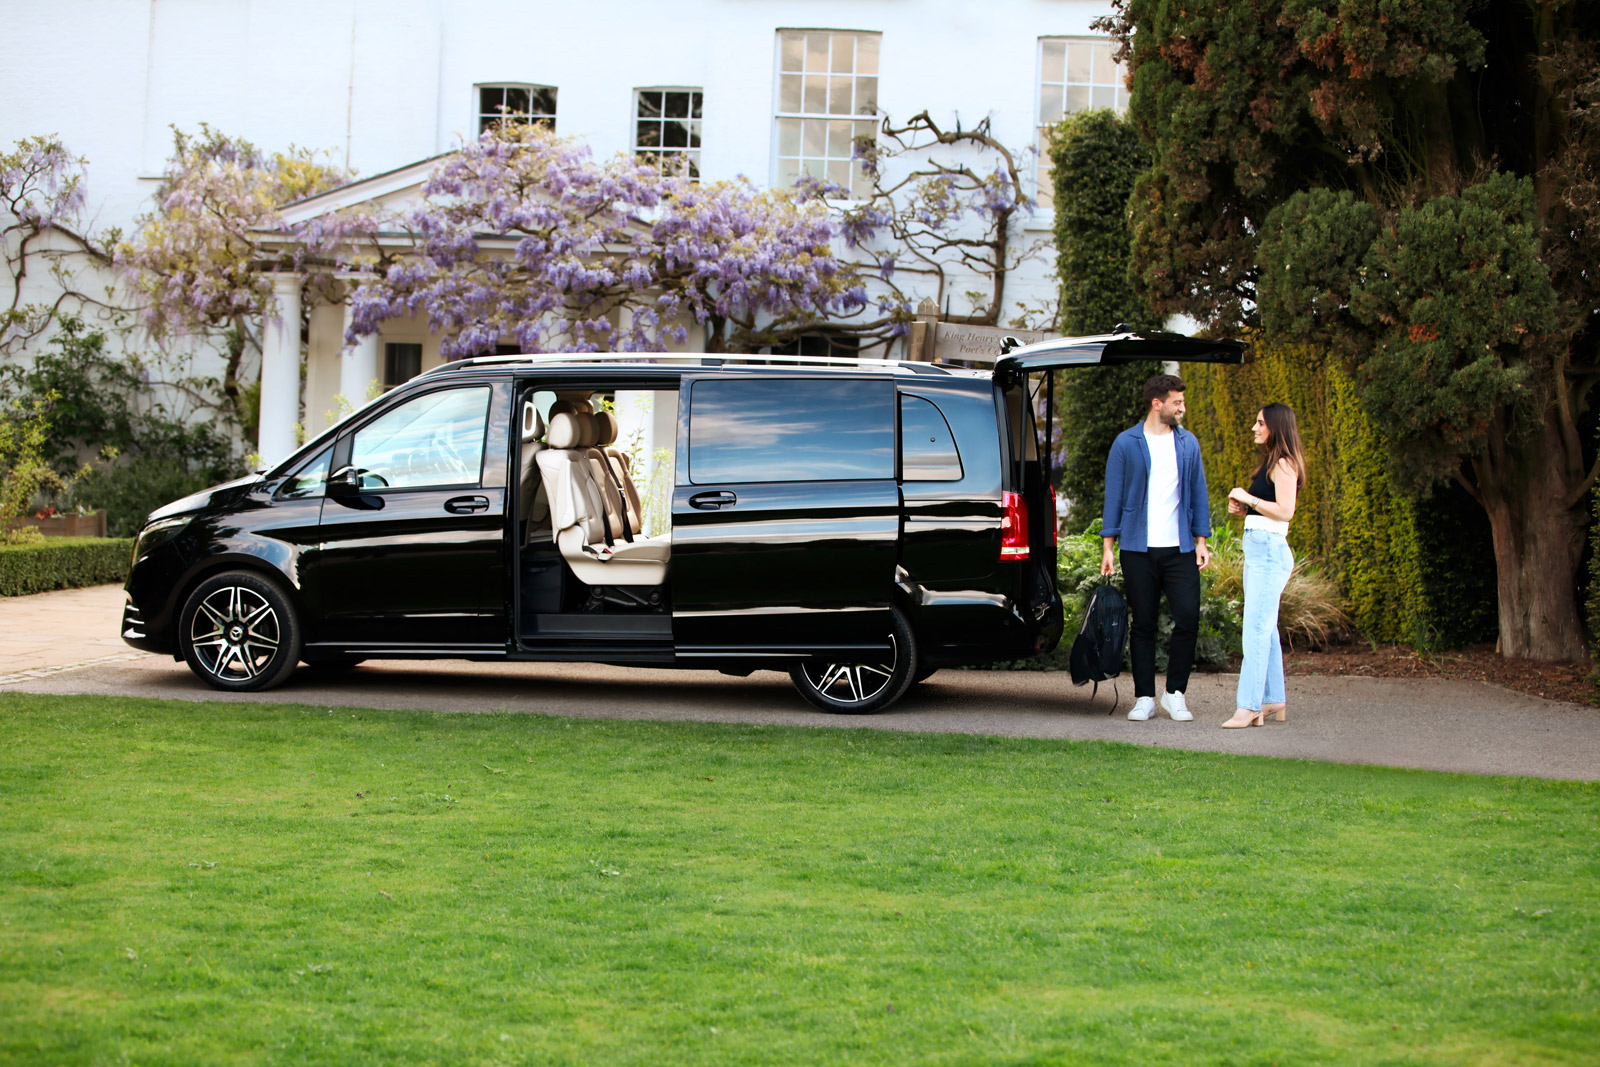 V-Class chauffeur car with passengers